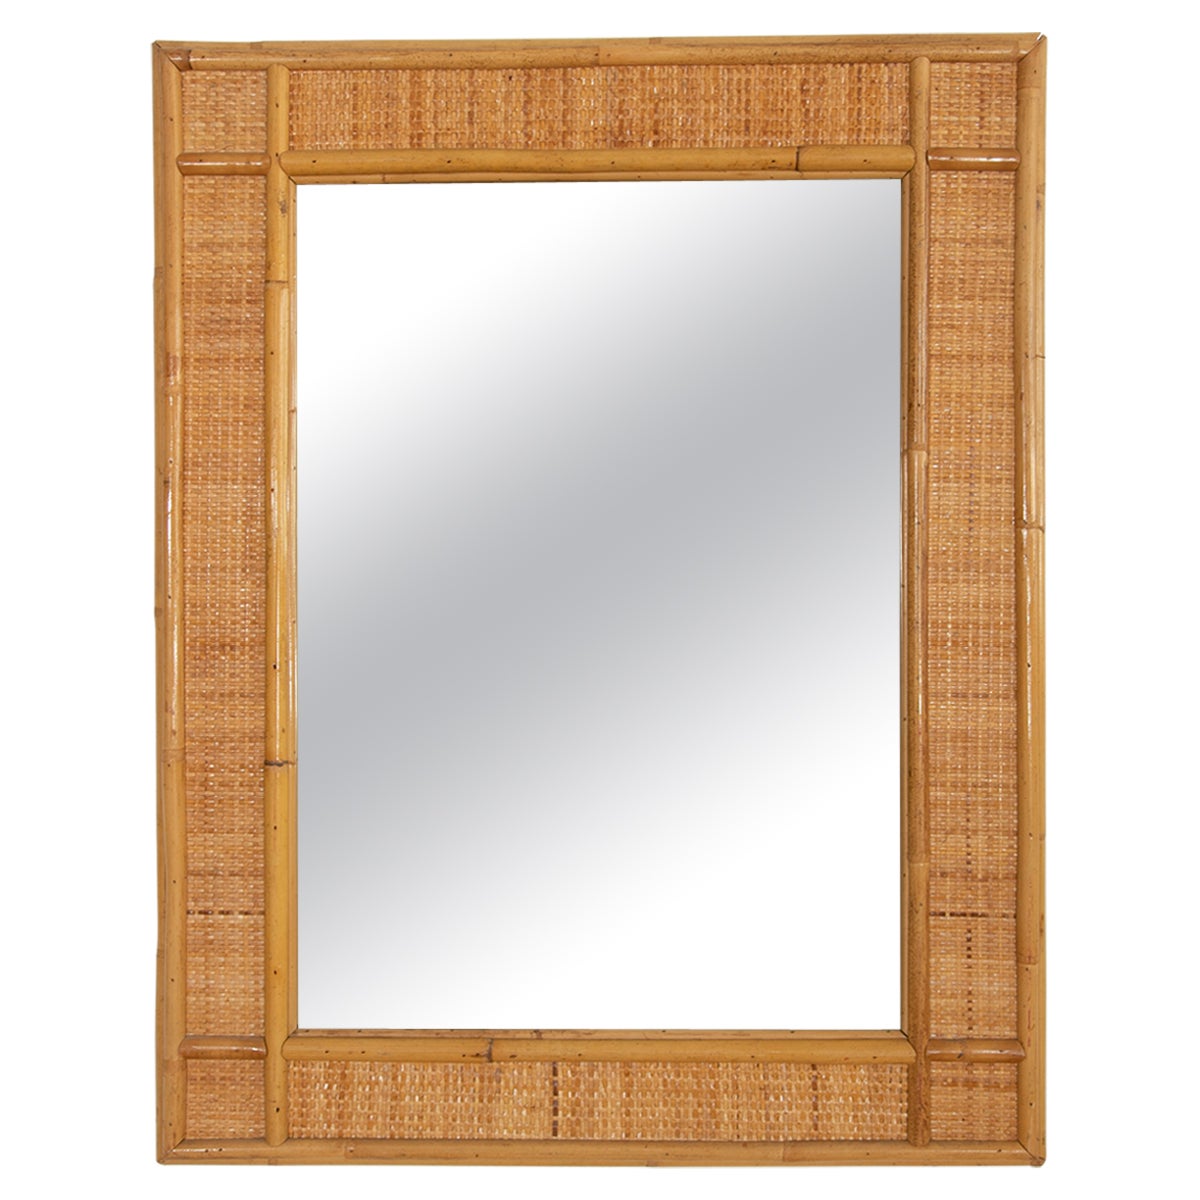 1980s Spanish Bamboo and Wicker Wall Mirror For Sale